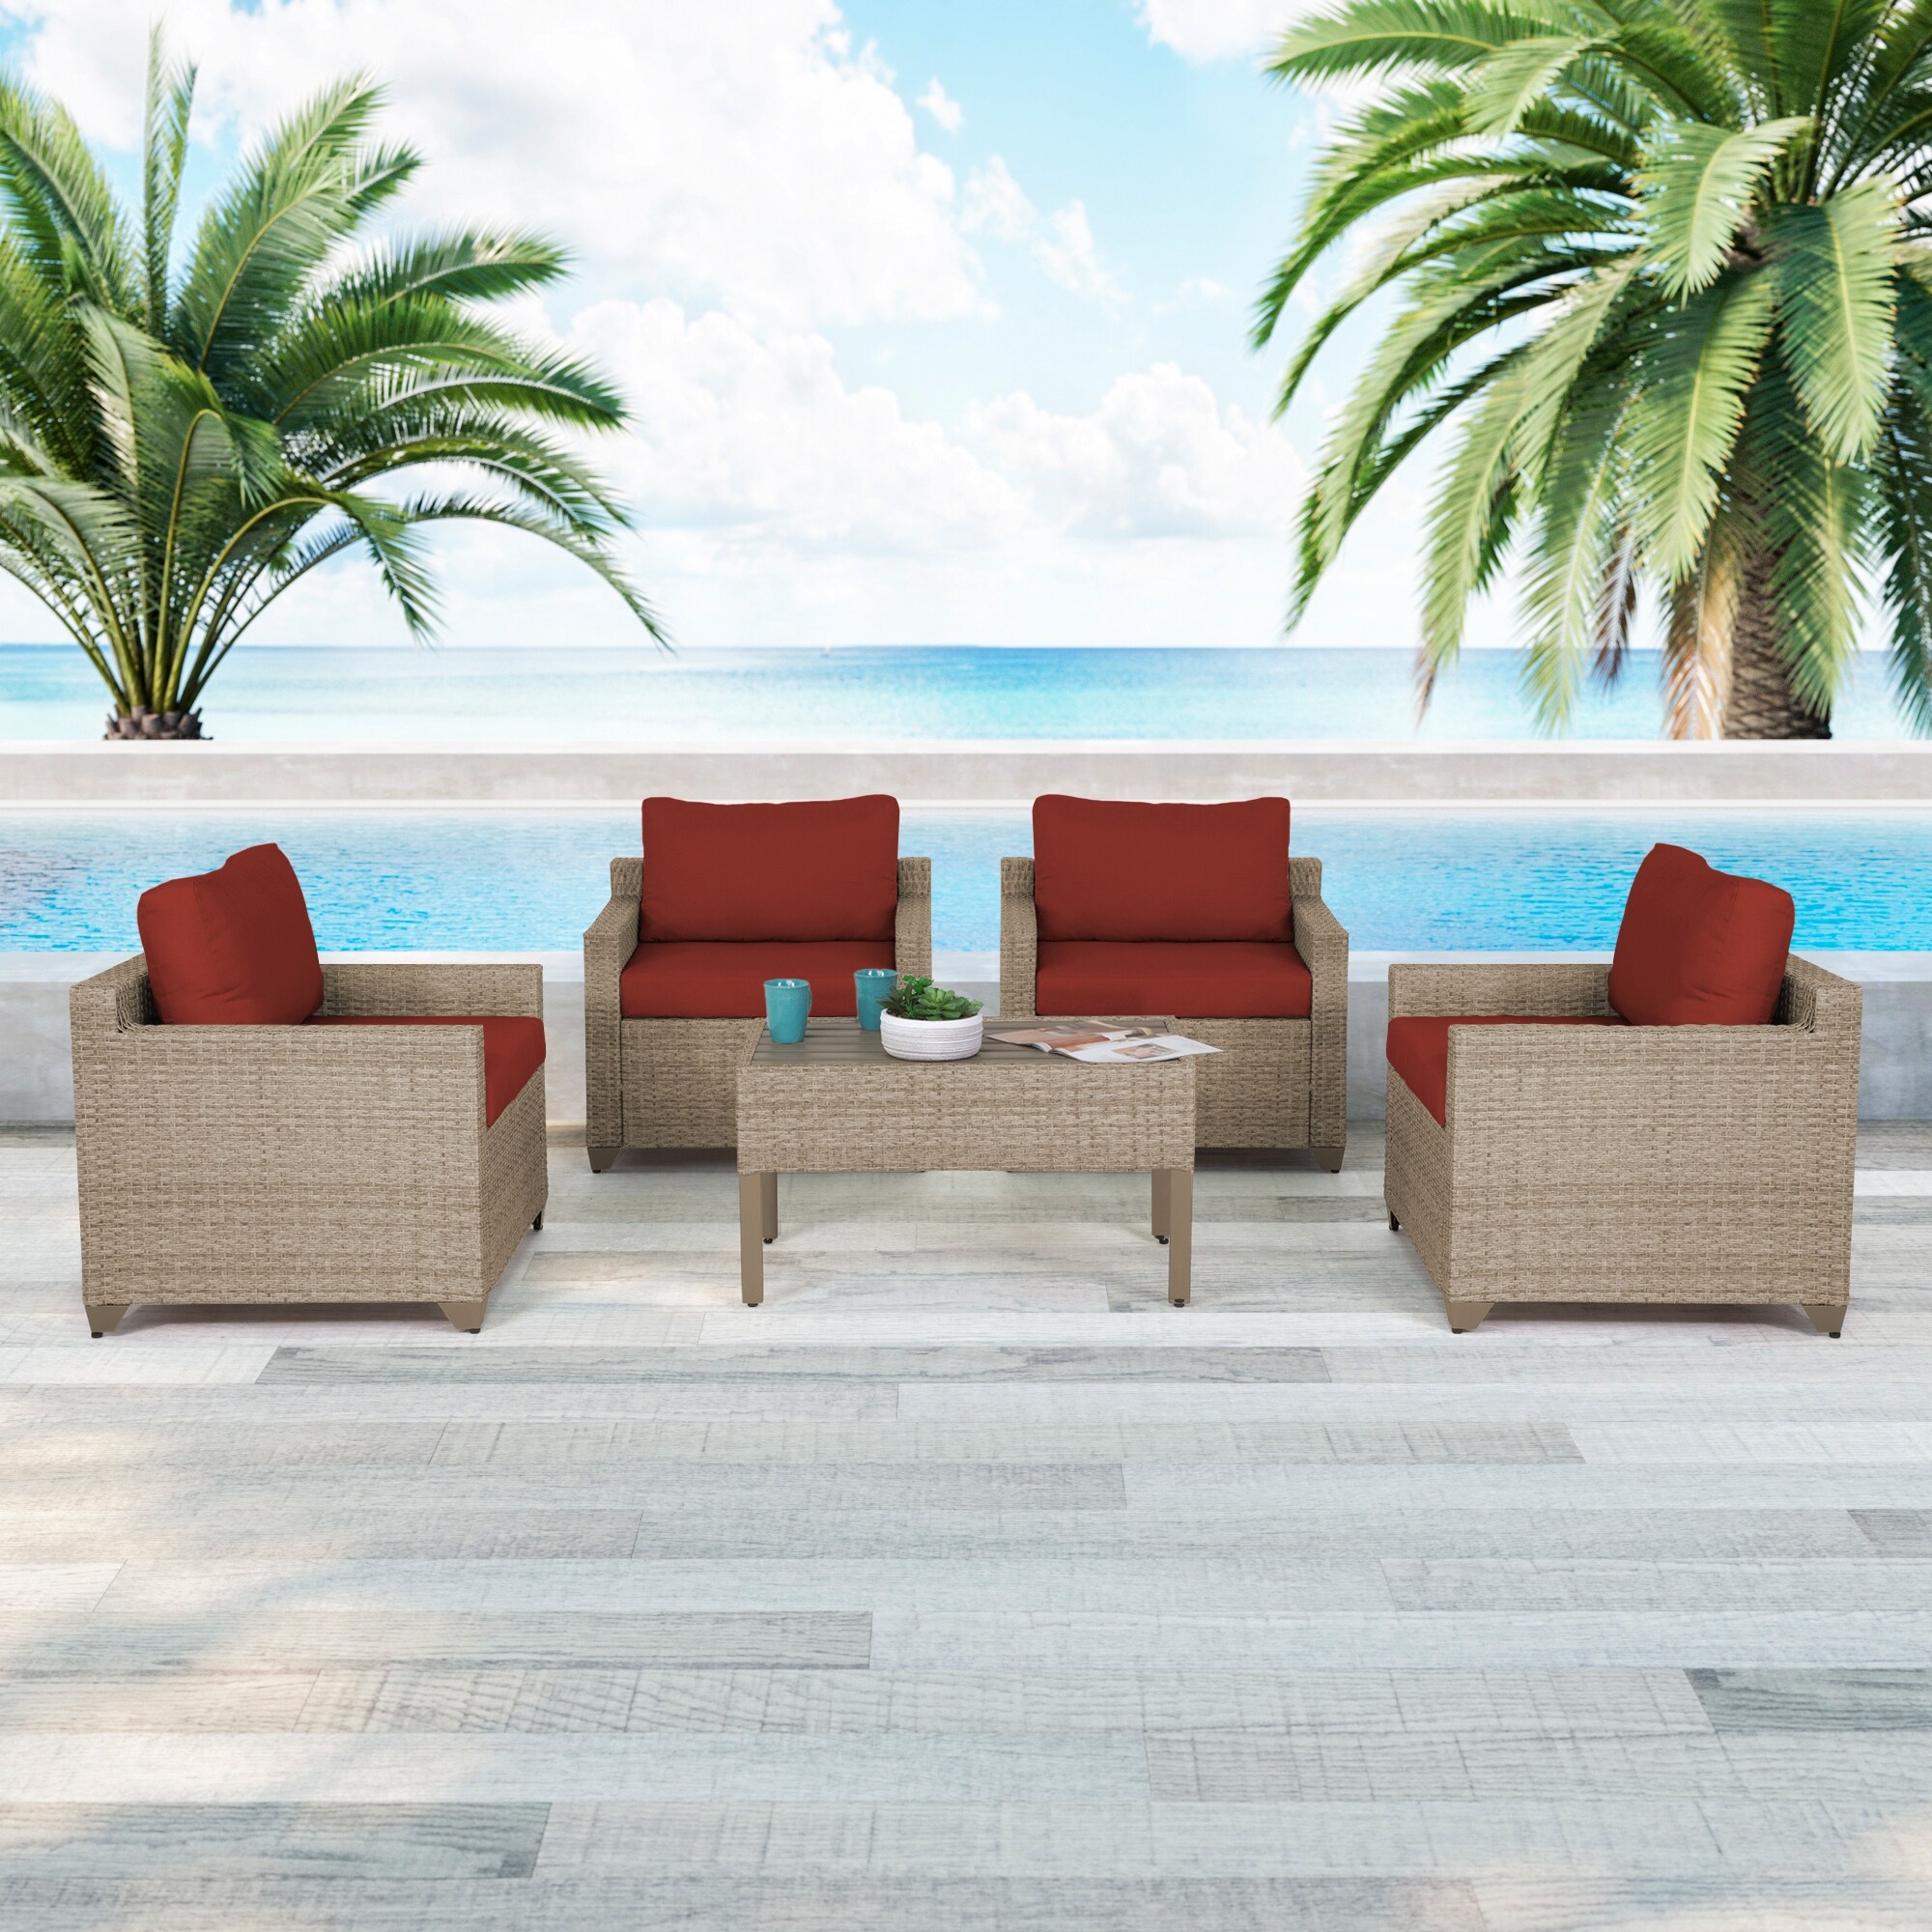 Maui 5-piece Outdoor Conversation Set Including 4 Club Chairs And Coffee Table In Natural Aged Wicker